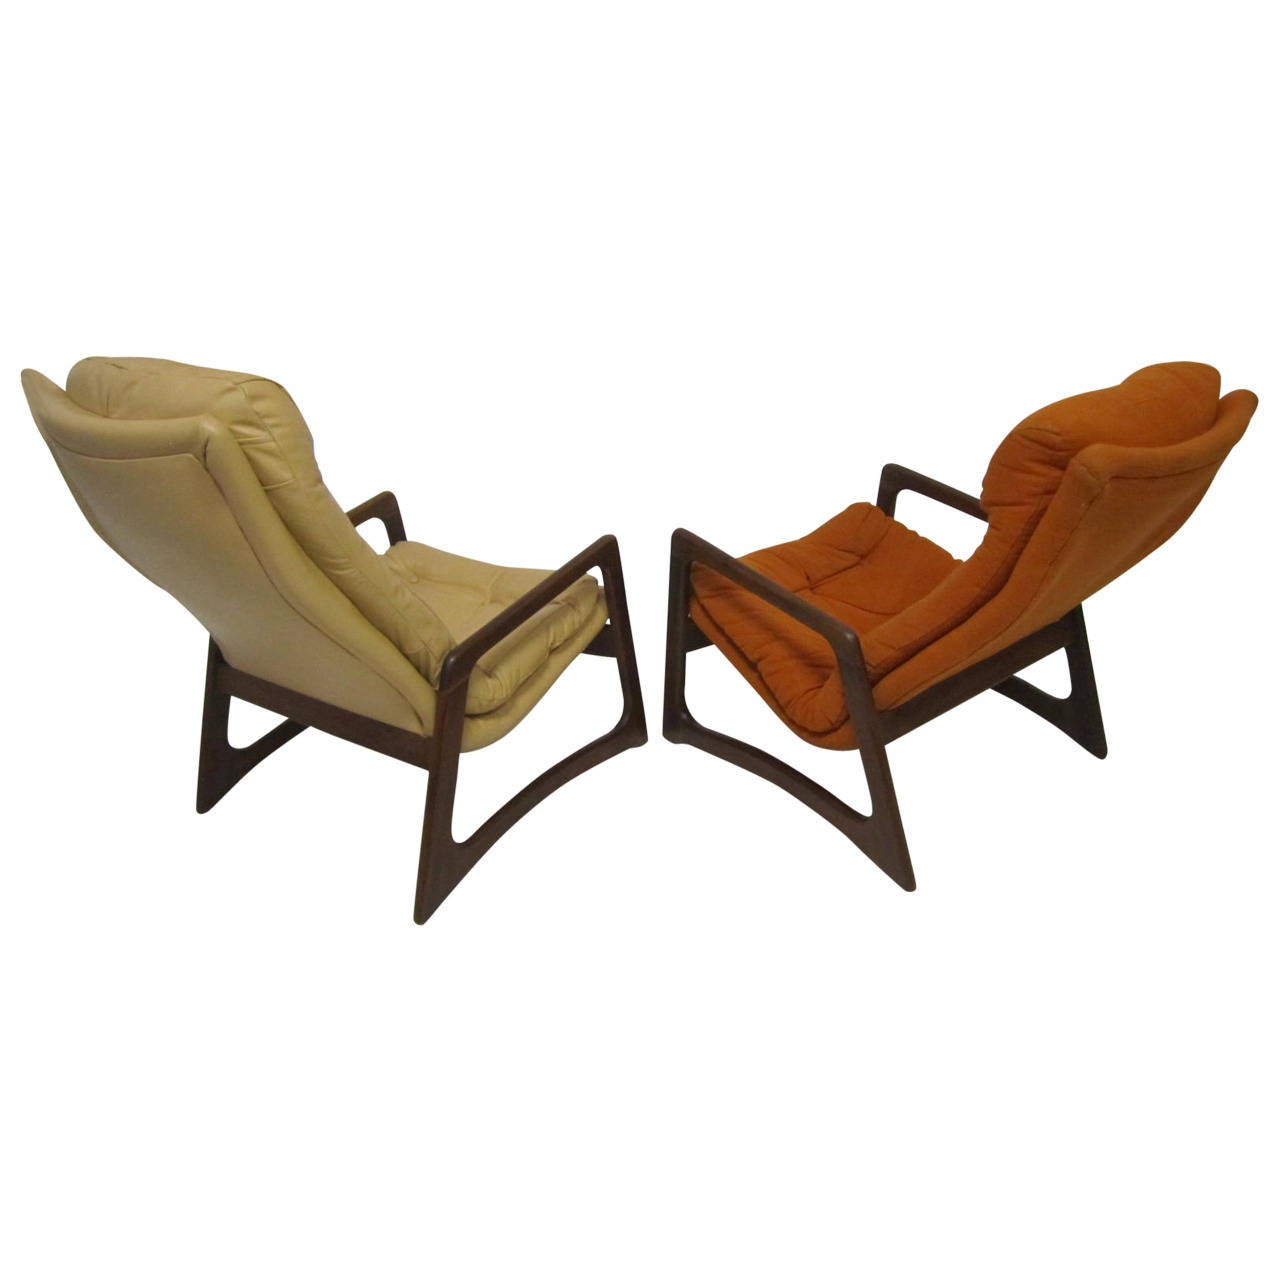 Sculptural Pair of Adrian Pearsall Walnut Lounge Chairs Mid-Century Modern